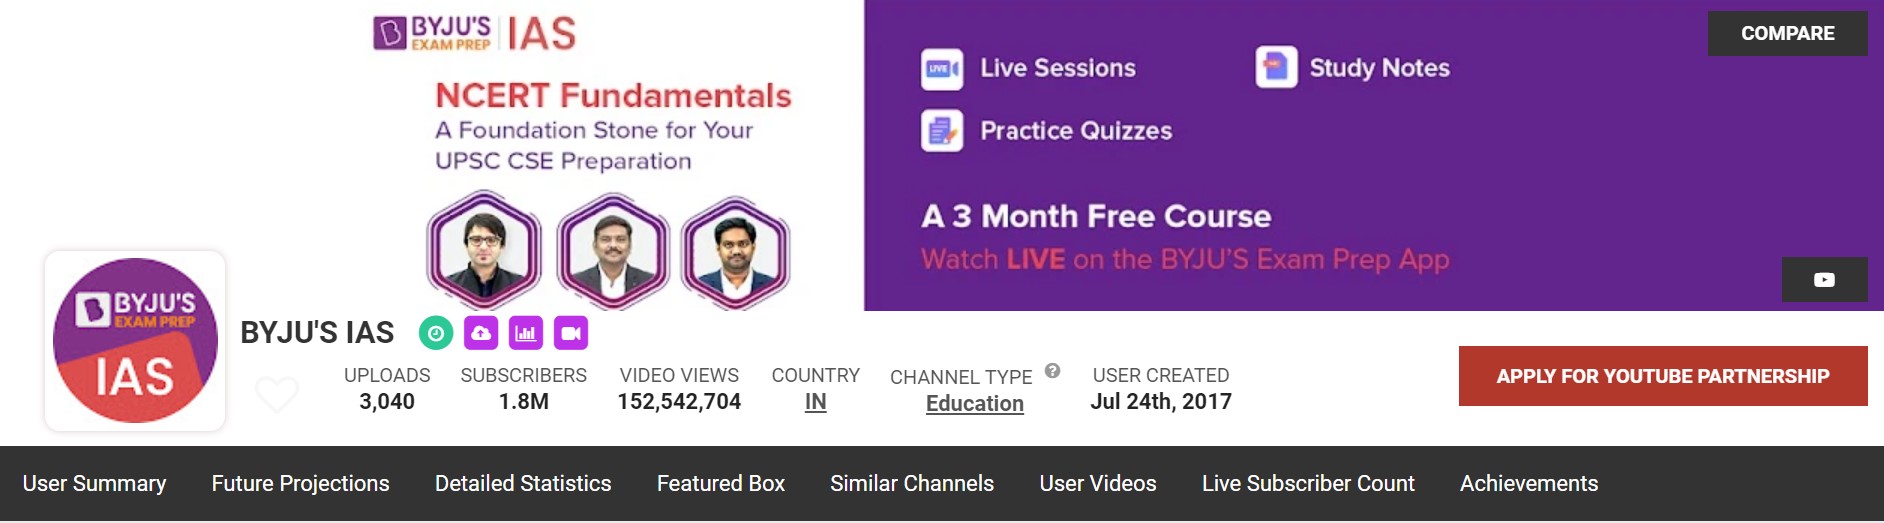 BYJU’S IAS YouTube Channel for UPSC Aspirants